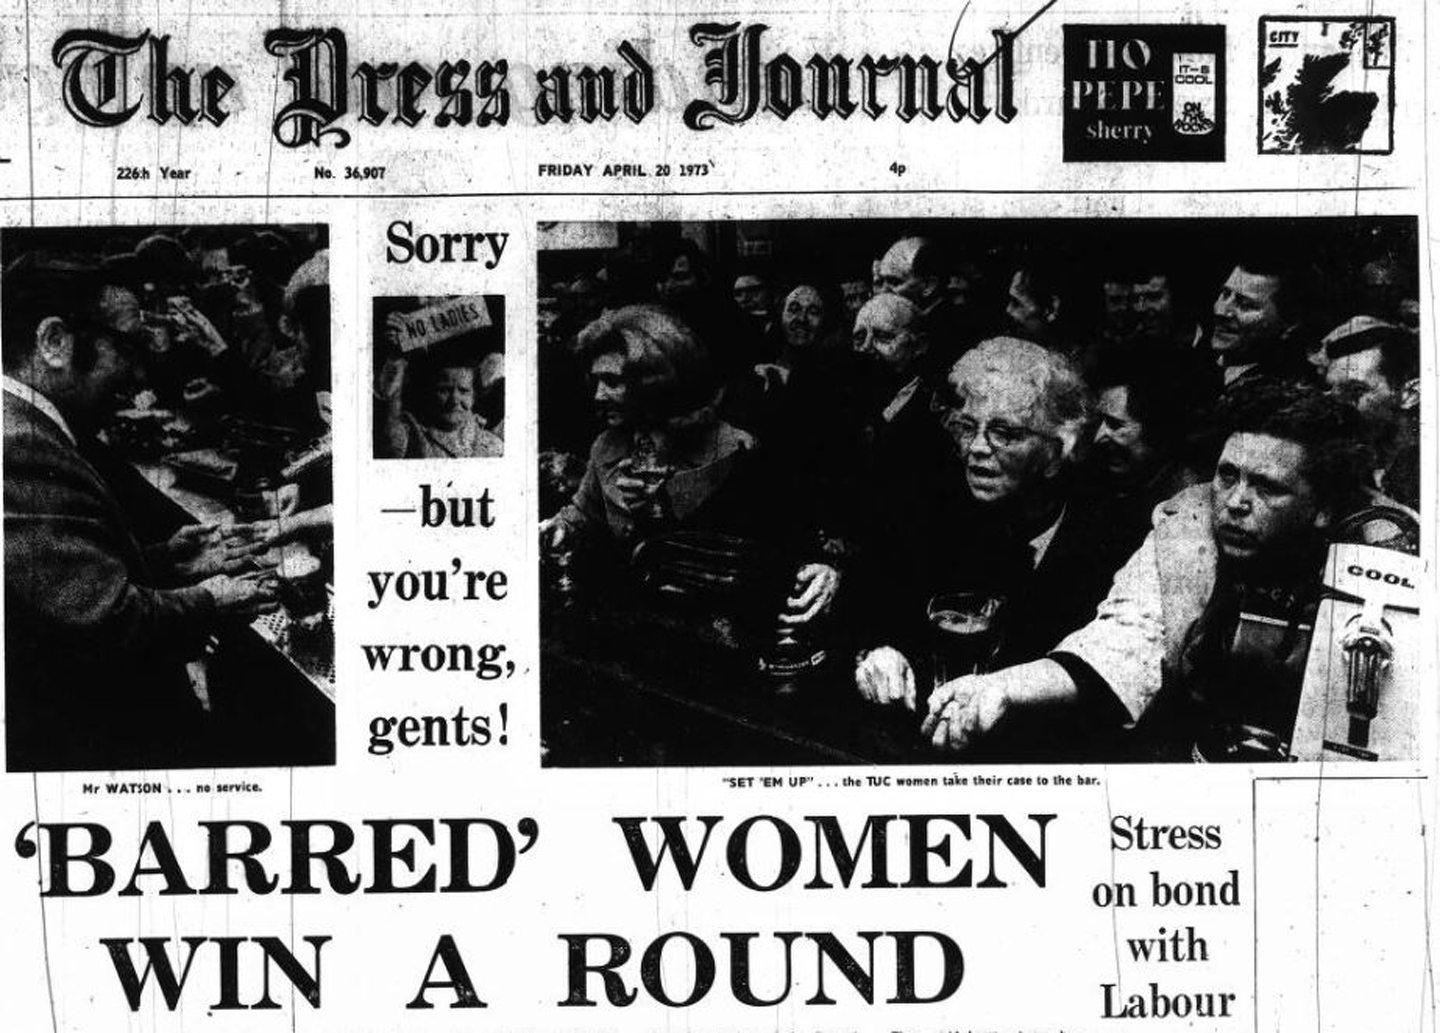 The Press and Journal coverage of The Grill 'No Ladies' protest in 1973.